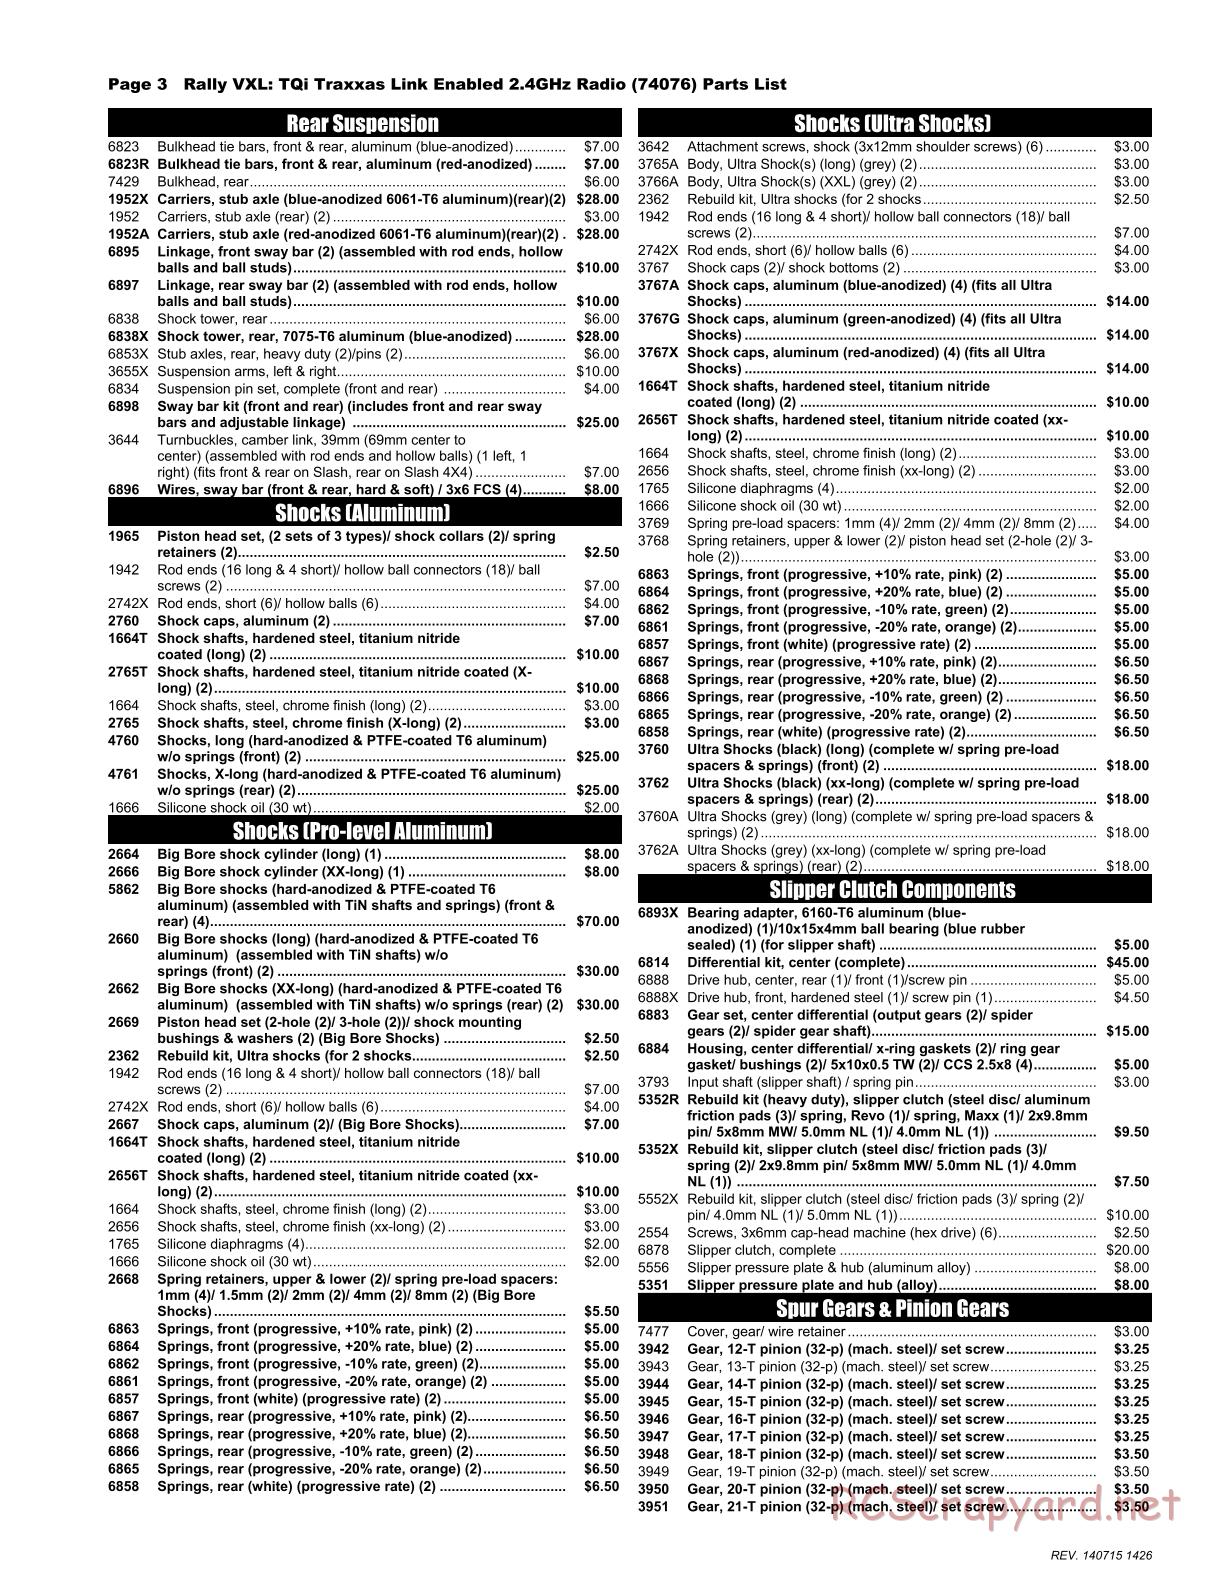 Traxxas - Rally (2014) - Parts List - Page 3